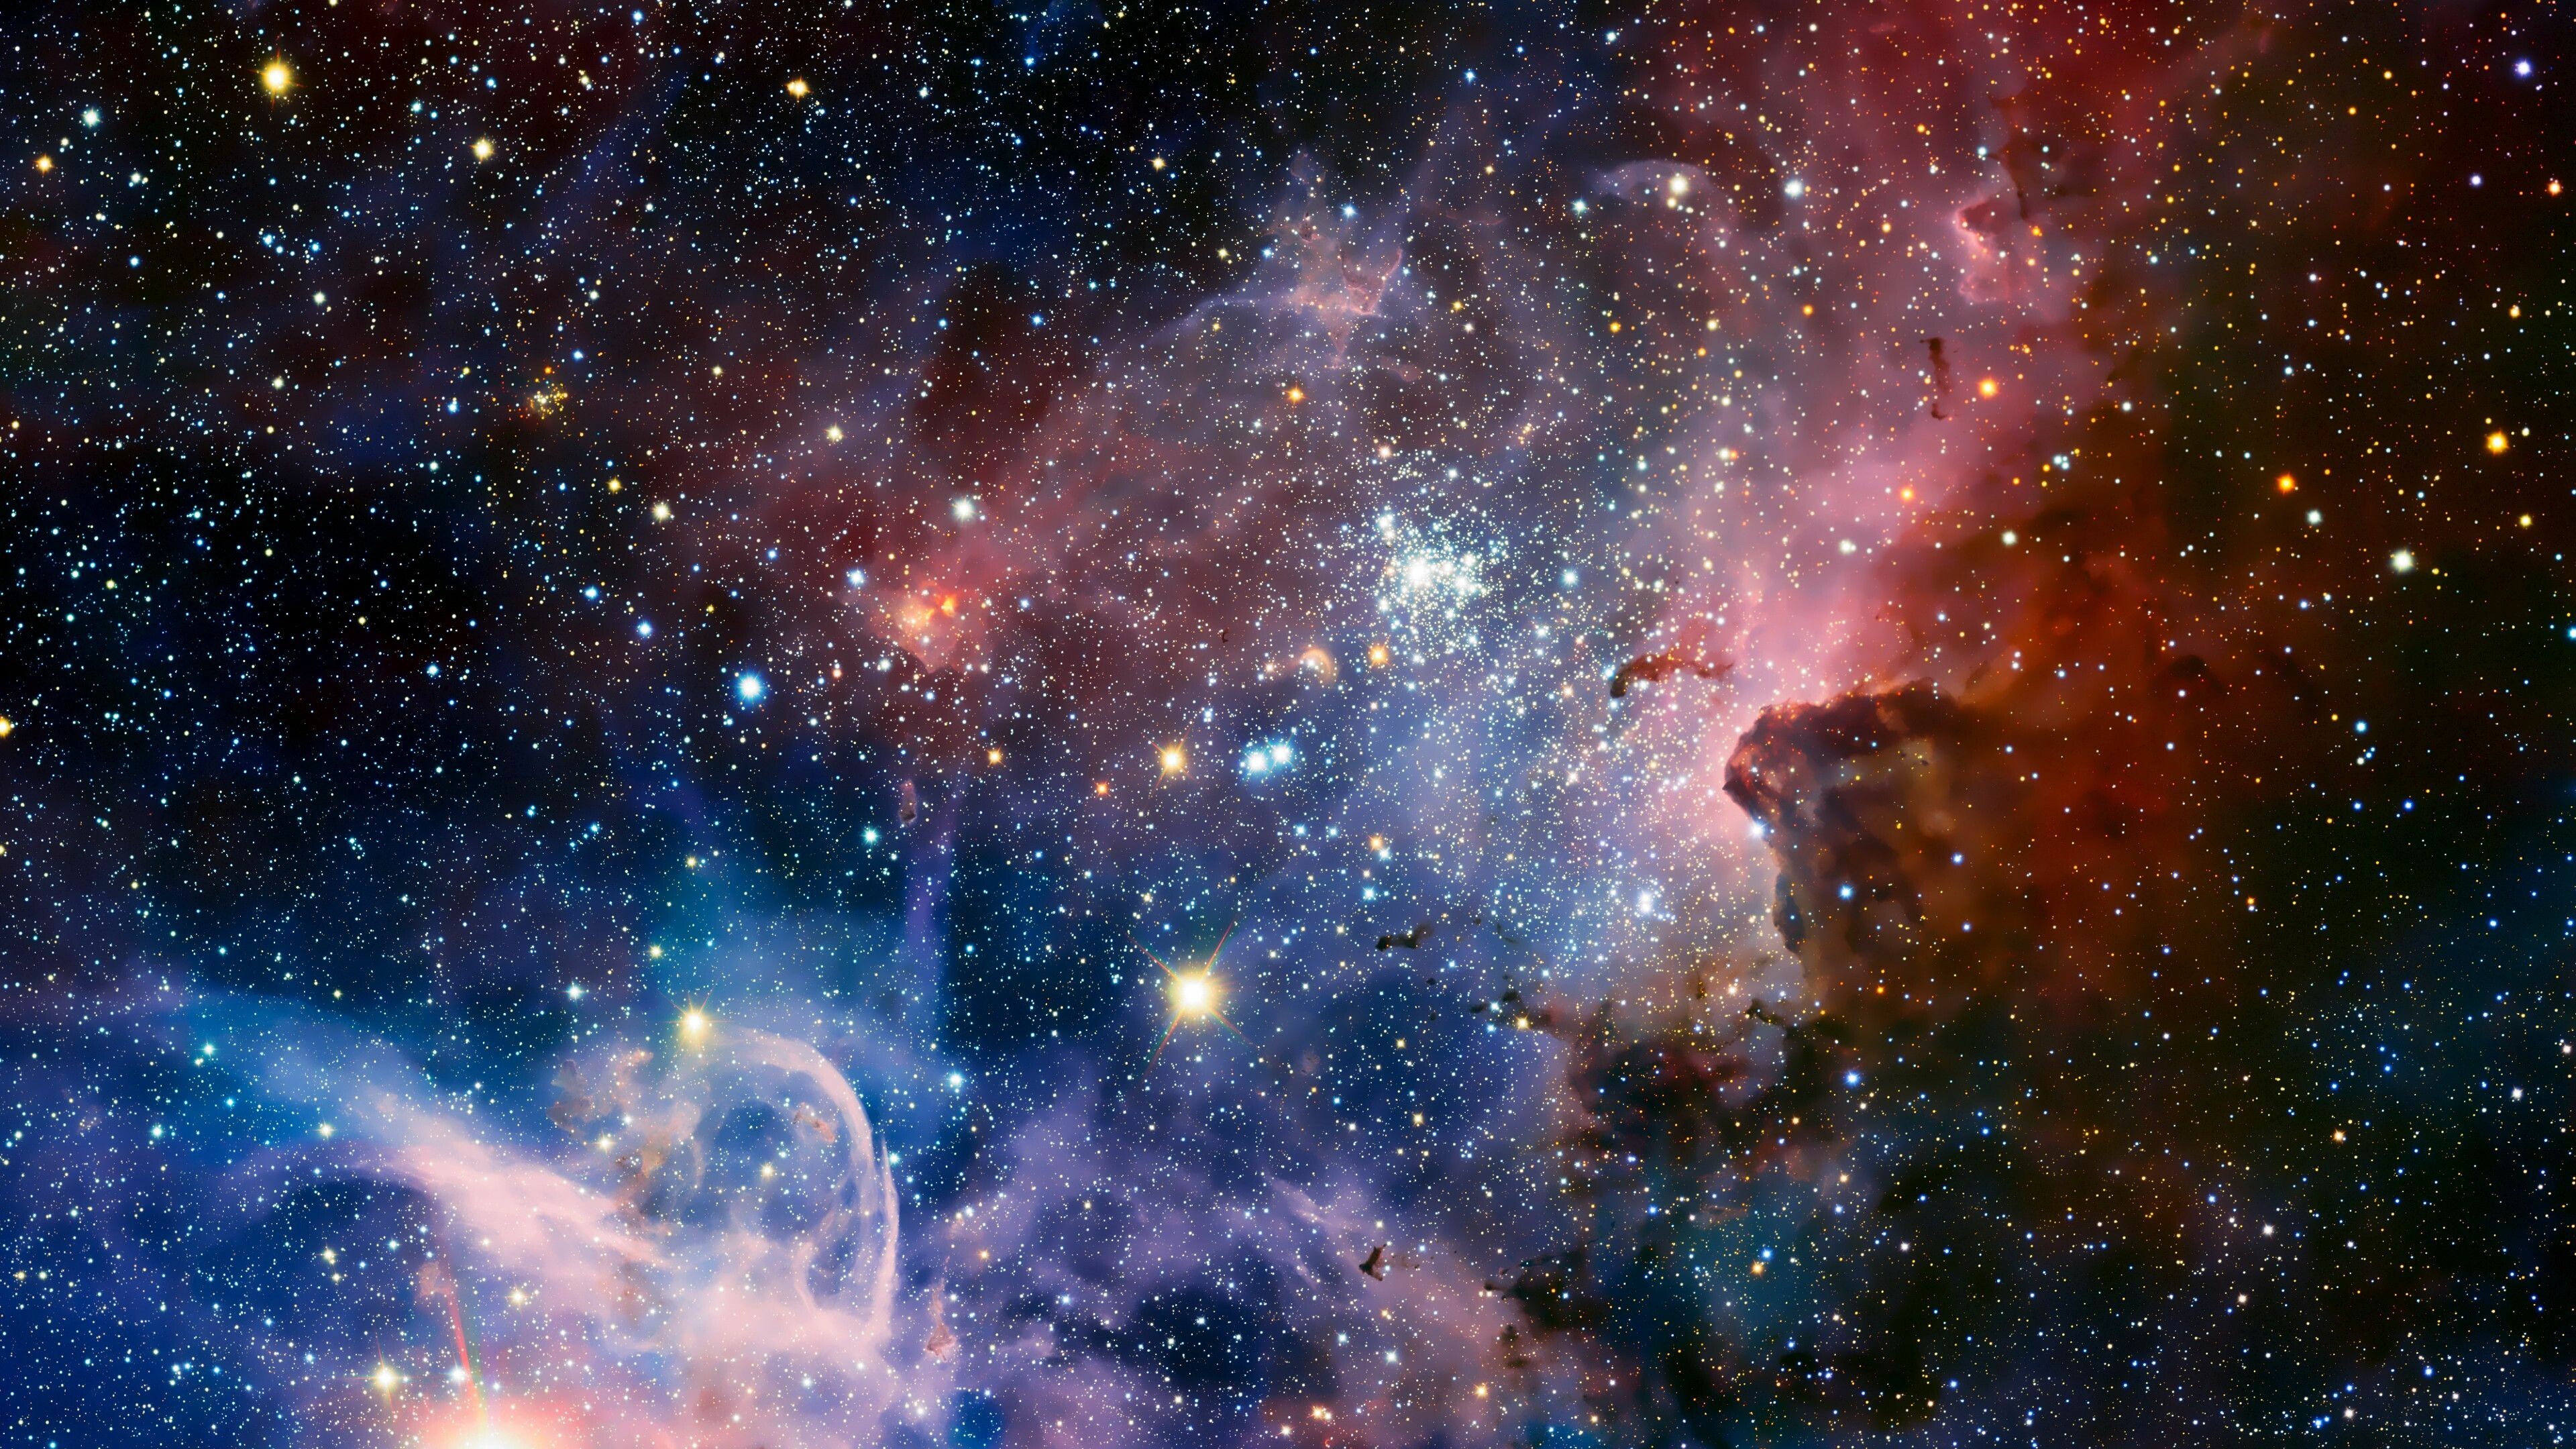 Outer Space: The observable universe, Cosmos, Nebula, Gravity, Galactic. 3840x2160 4K Wallpaper.